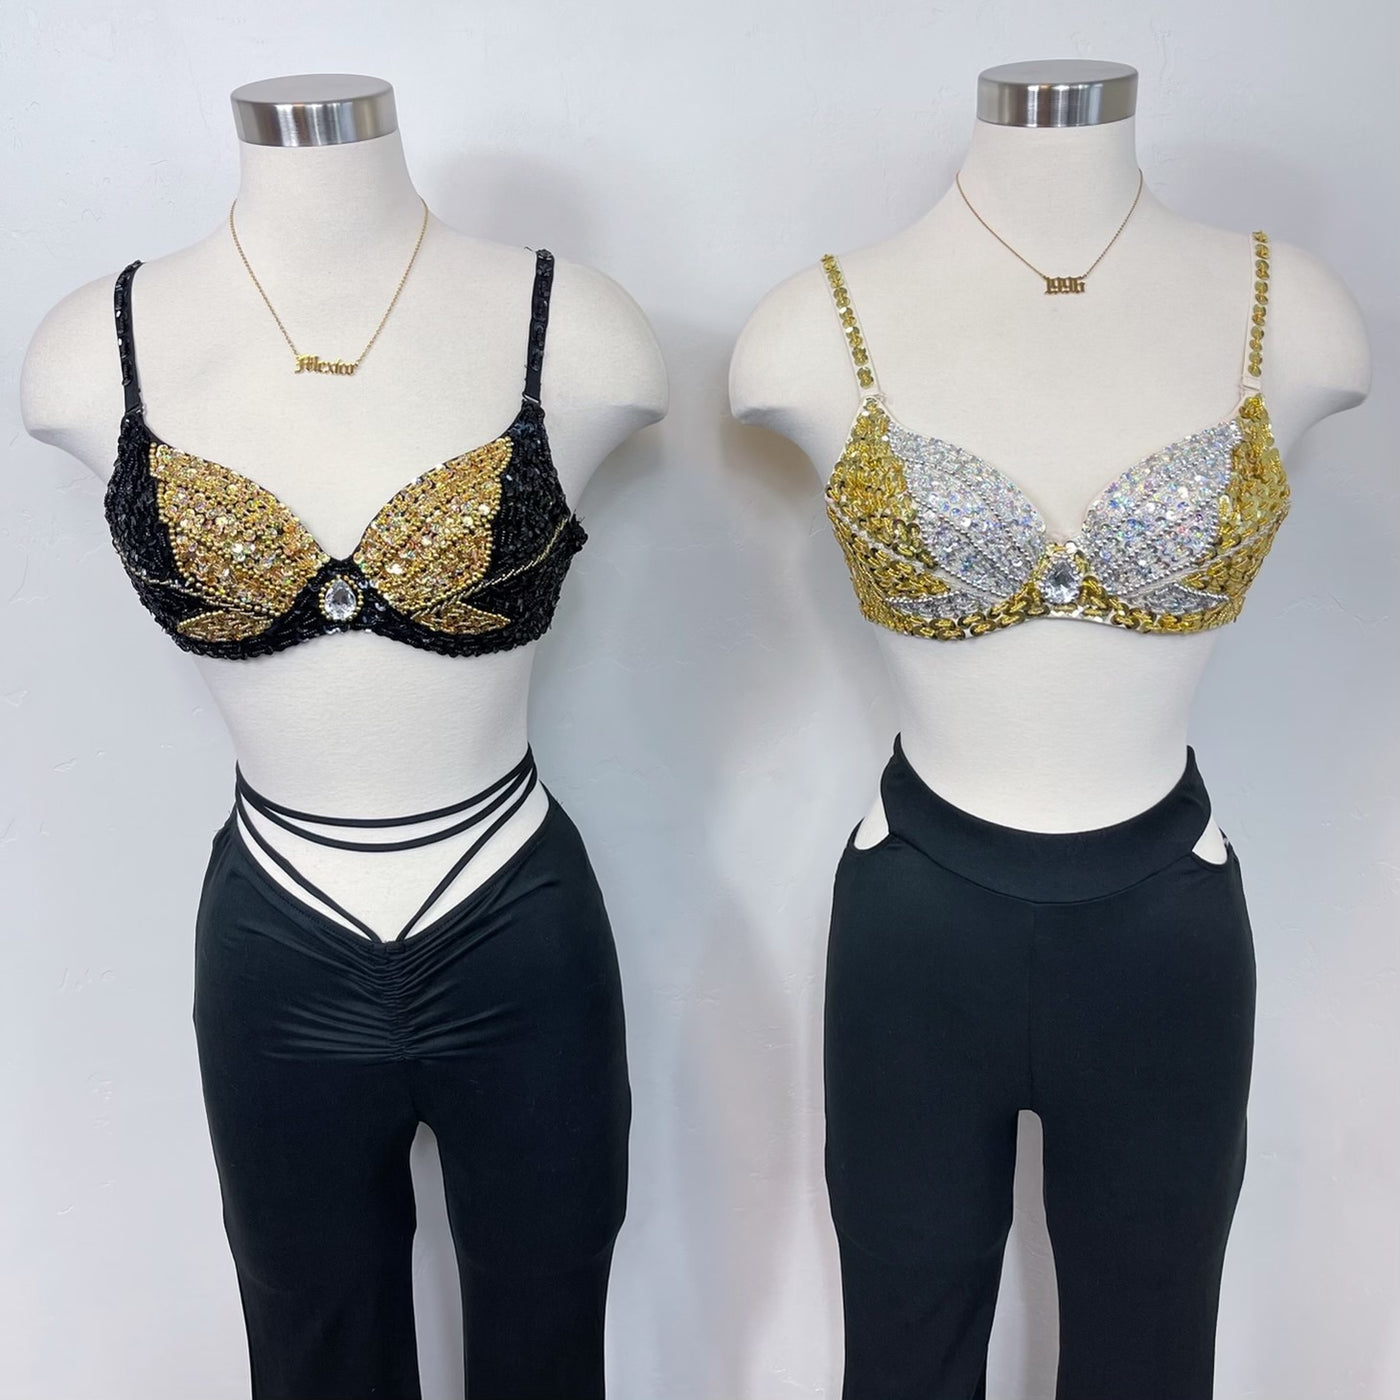 Own The Night Bra - Gold/Silver